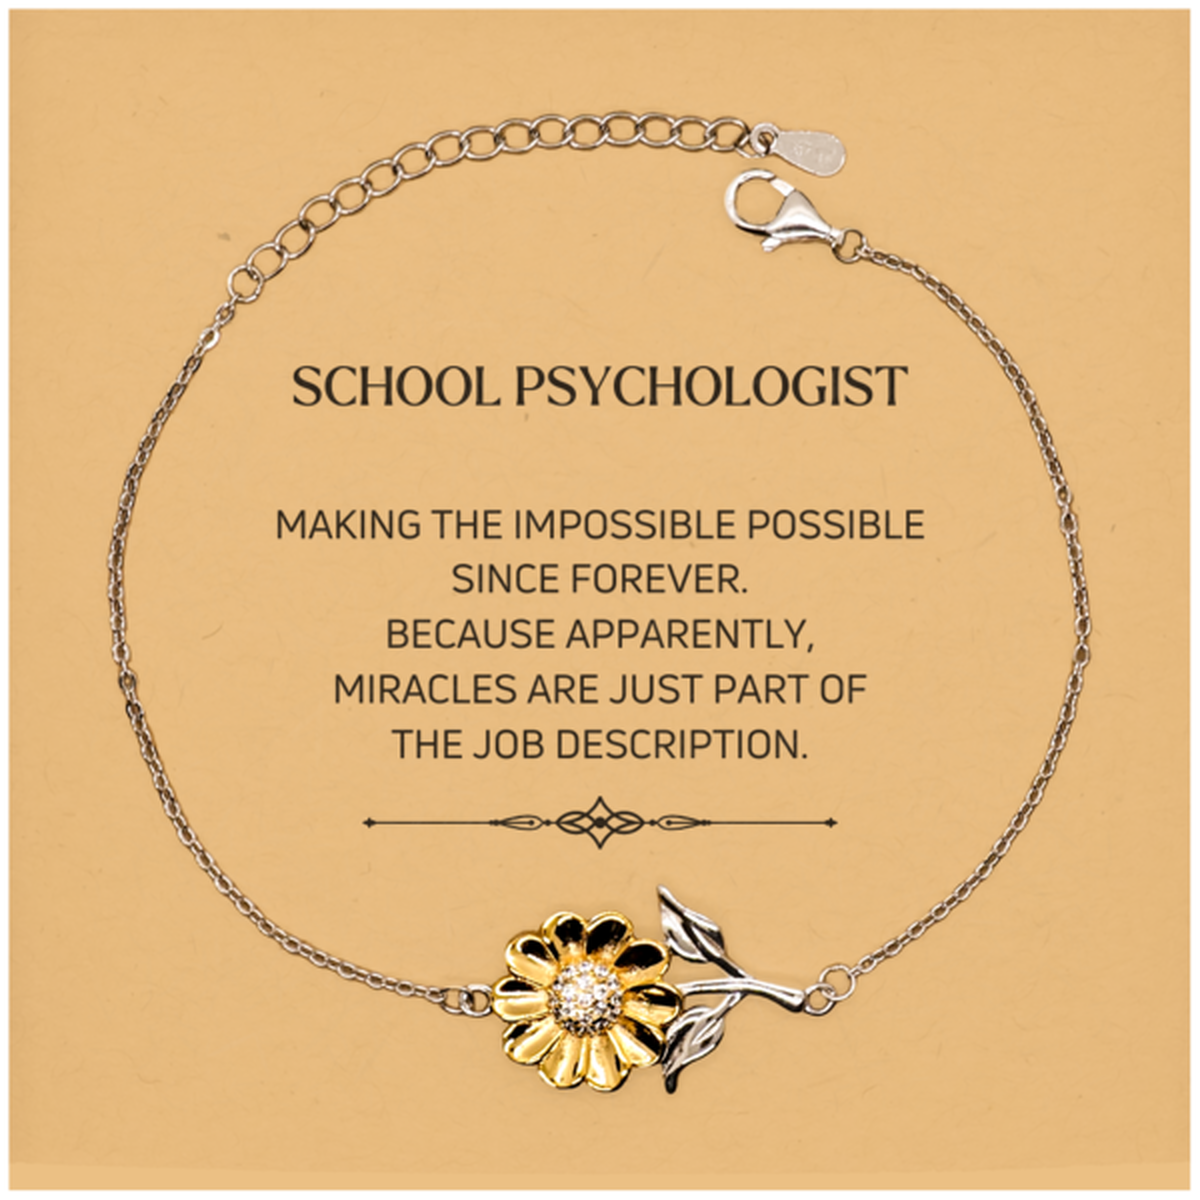 Funny School Psychologist Gifts, Miracles are just part of the job description, Inspirational Birthday Christmas Sunflower Bracelet For School Psychologist, Men, Women, Coworkers, Friends, Boss